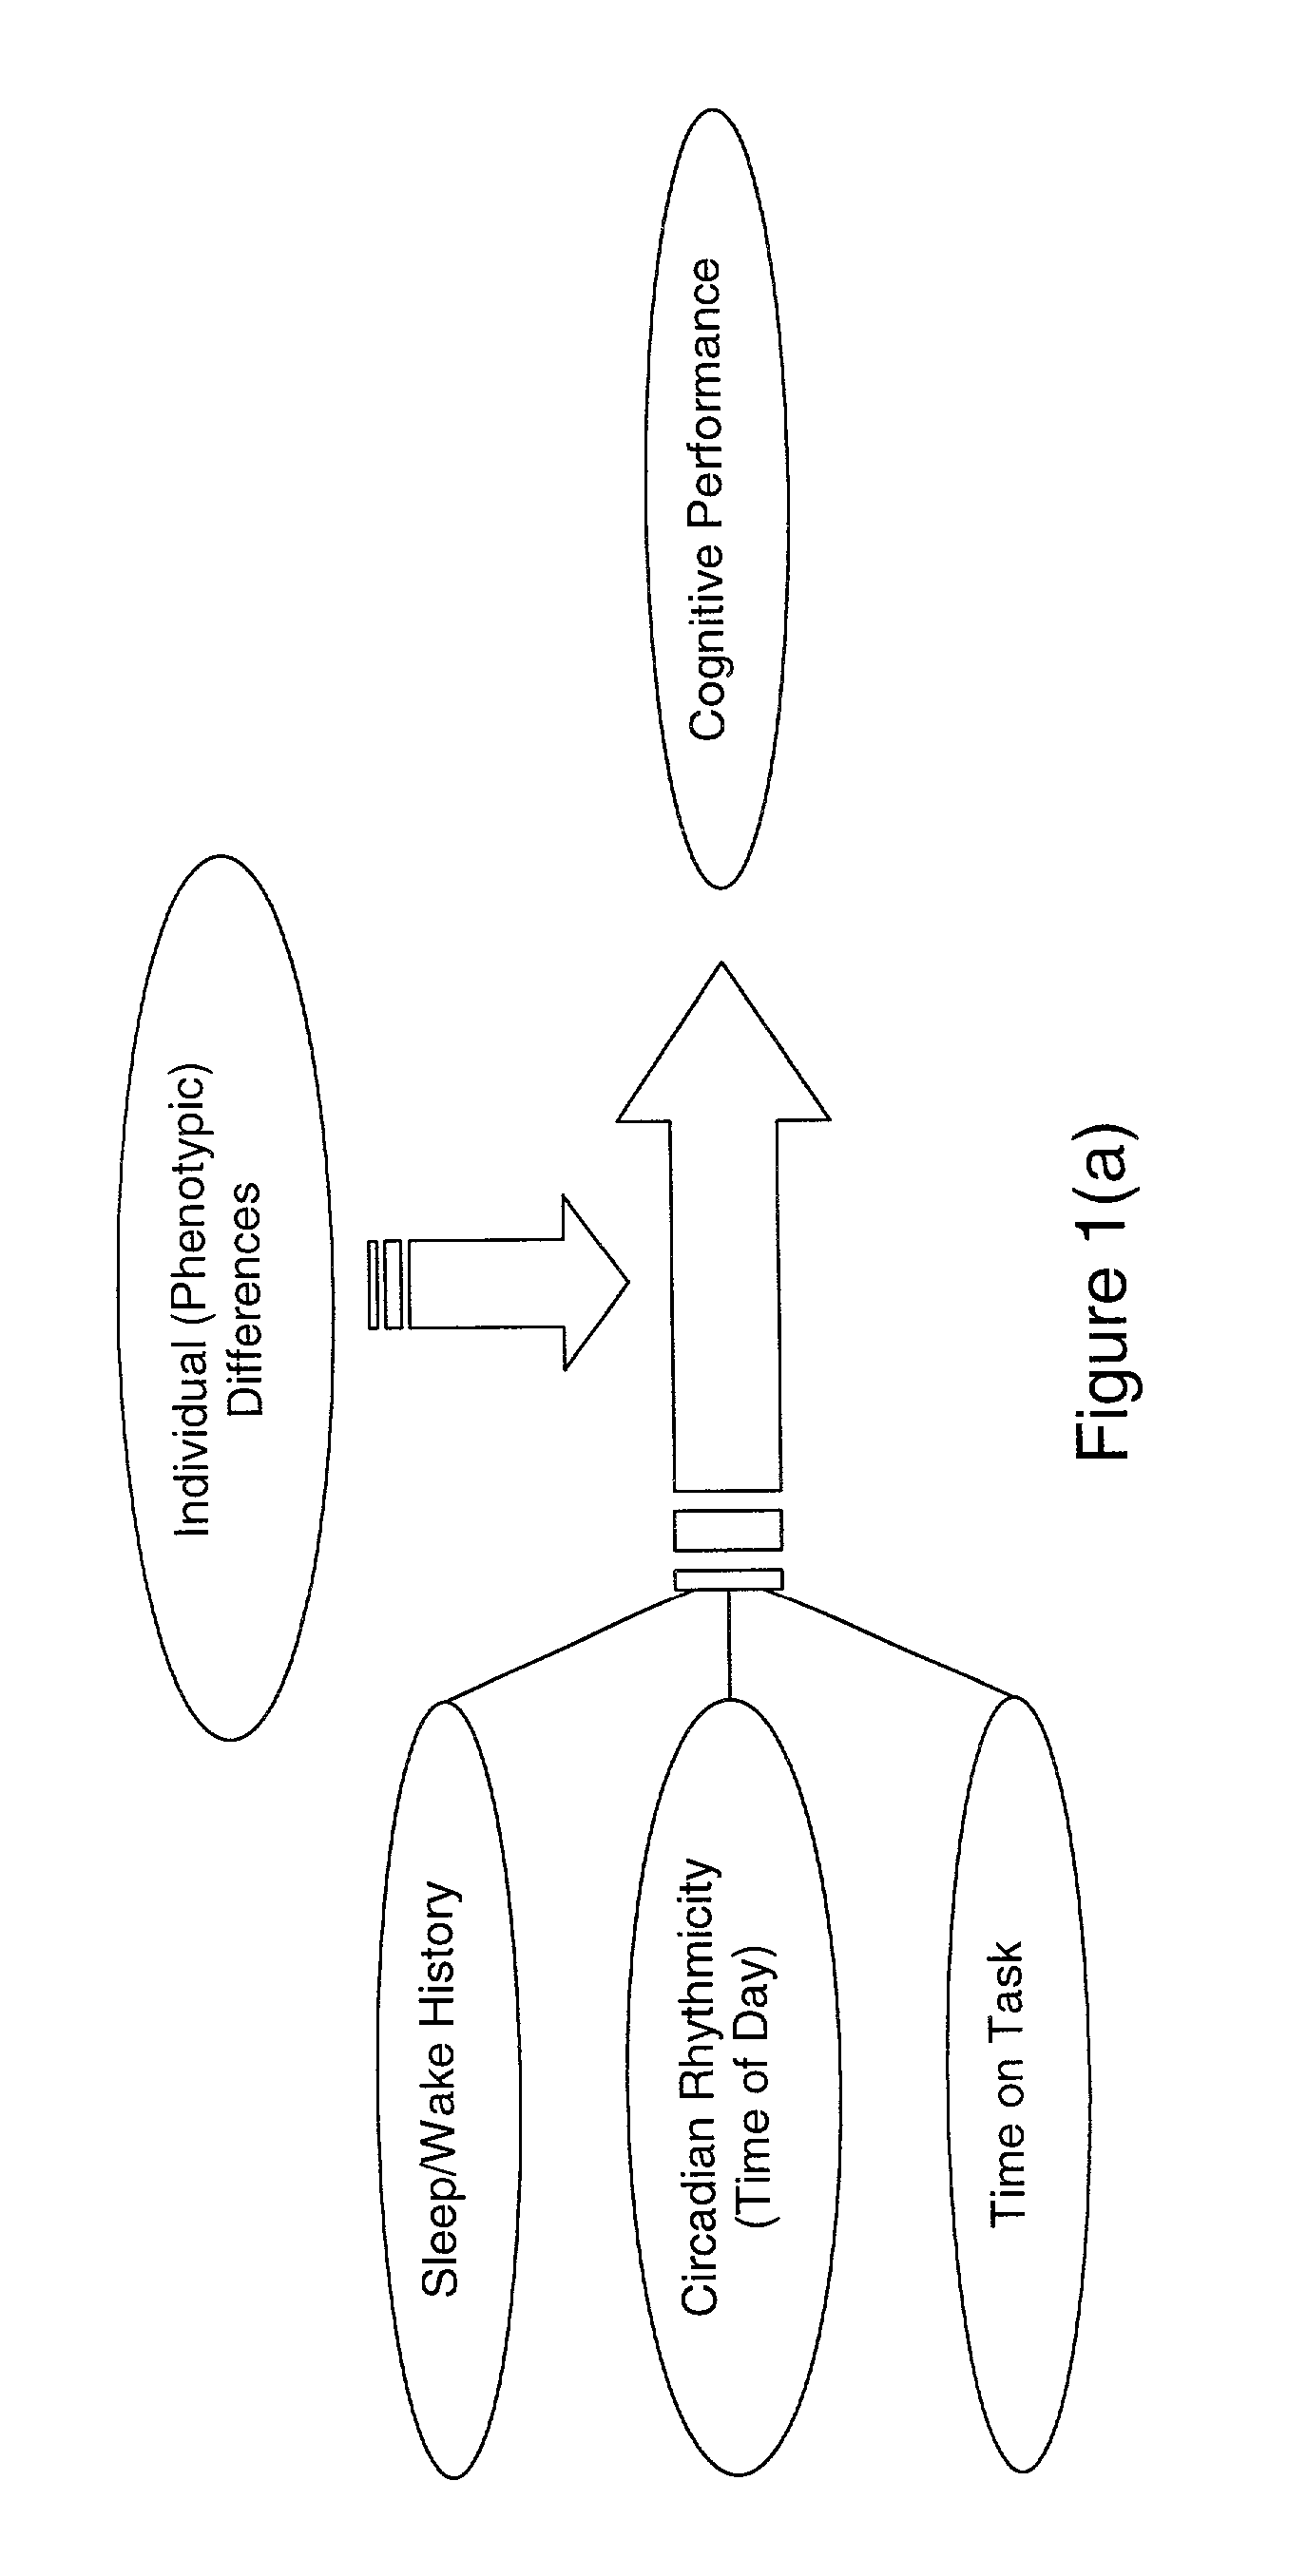 System and method for predicting human cognitive performance using data from an actigraph